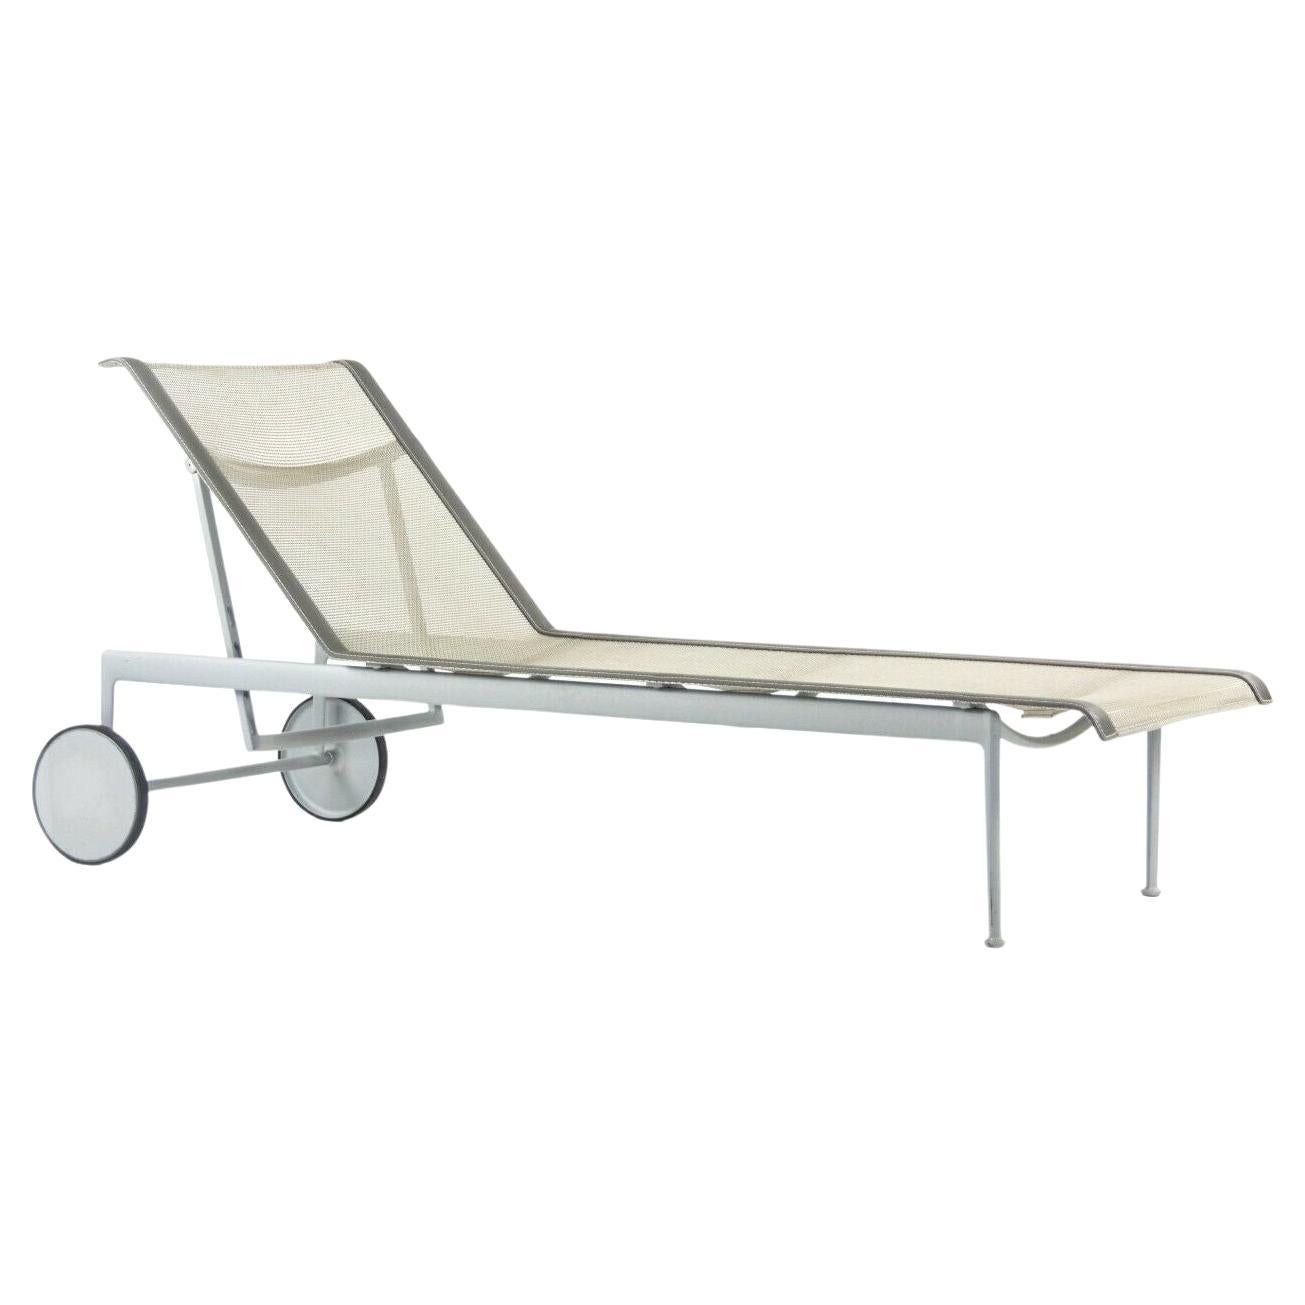 2012 Richard Schultz 1966 Series Adjustable Chaise Lounge Chair in Silver For Sale